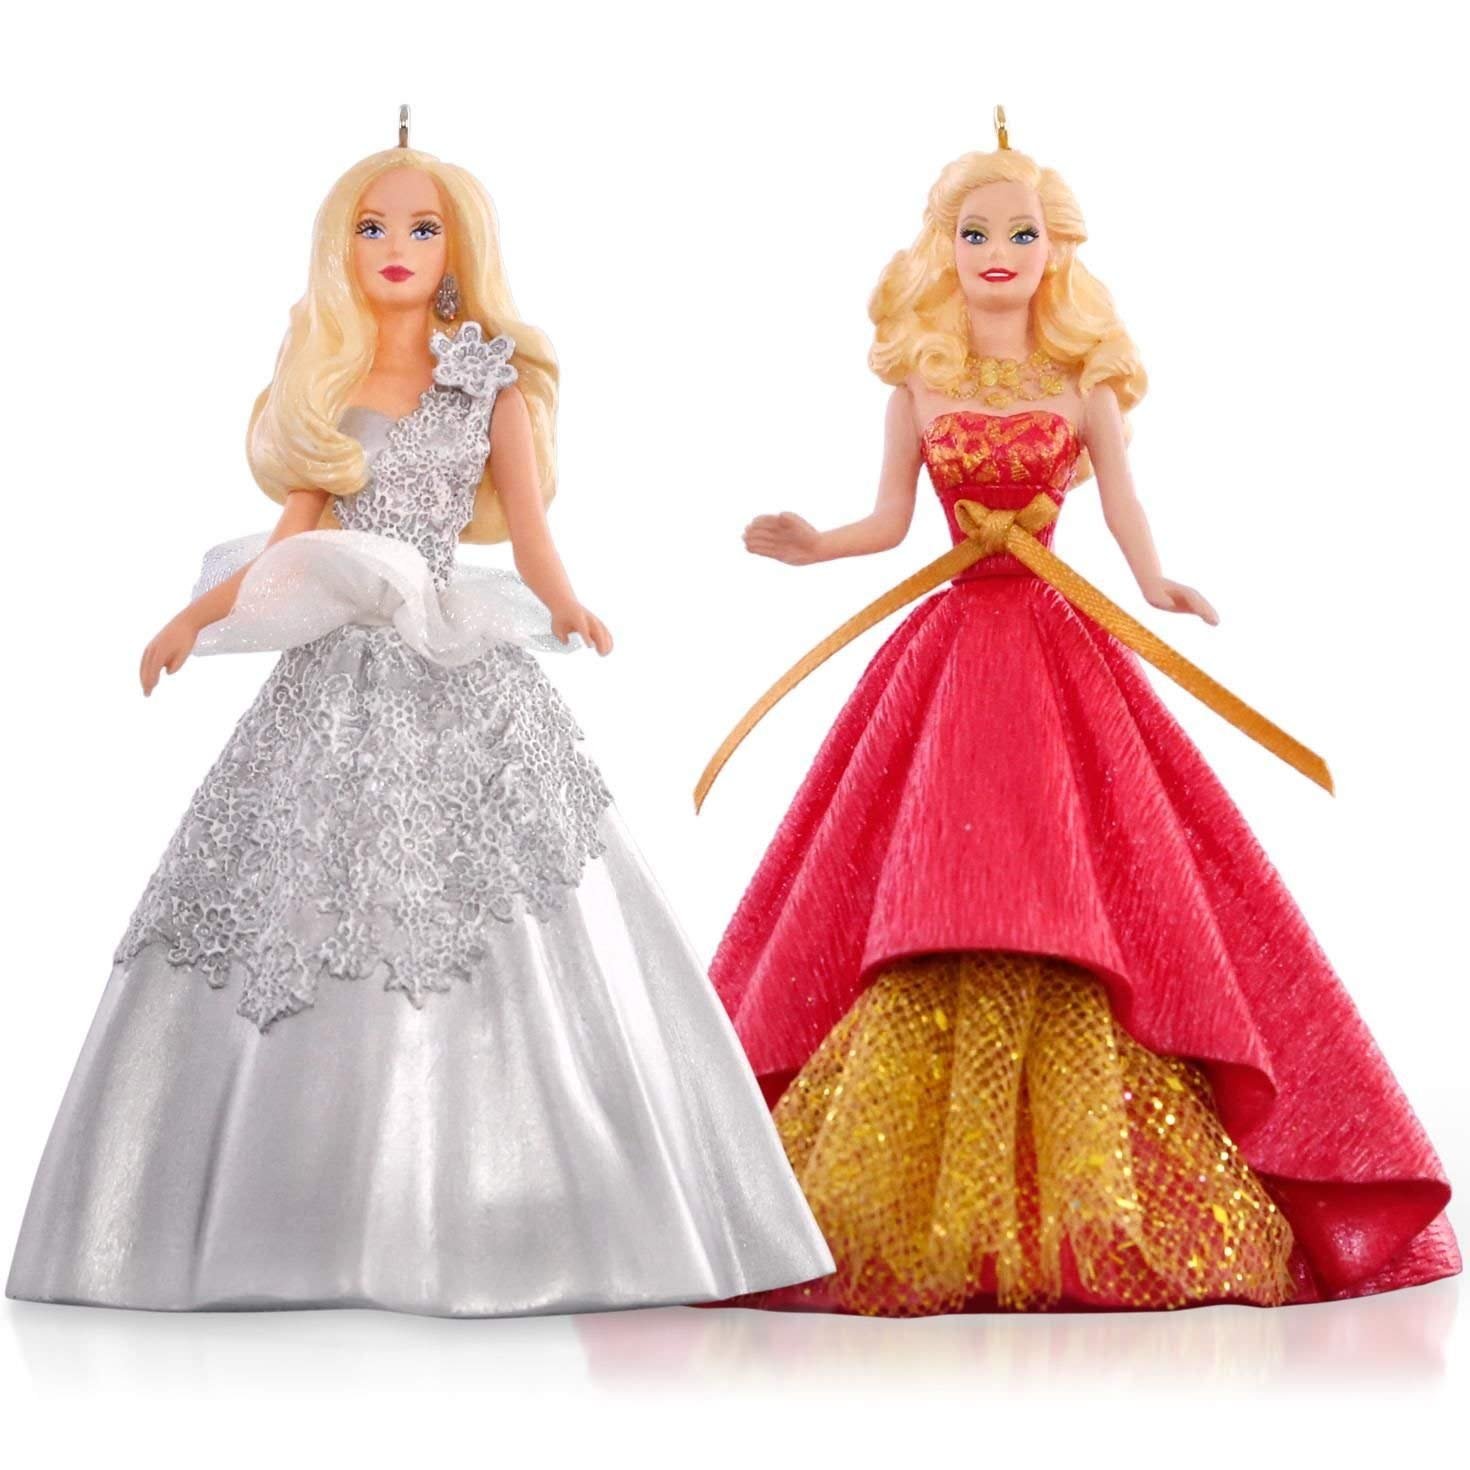 Barbie Christmas Ornaments Cool Stuff to Buy and Collect